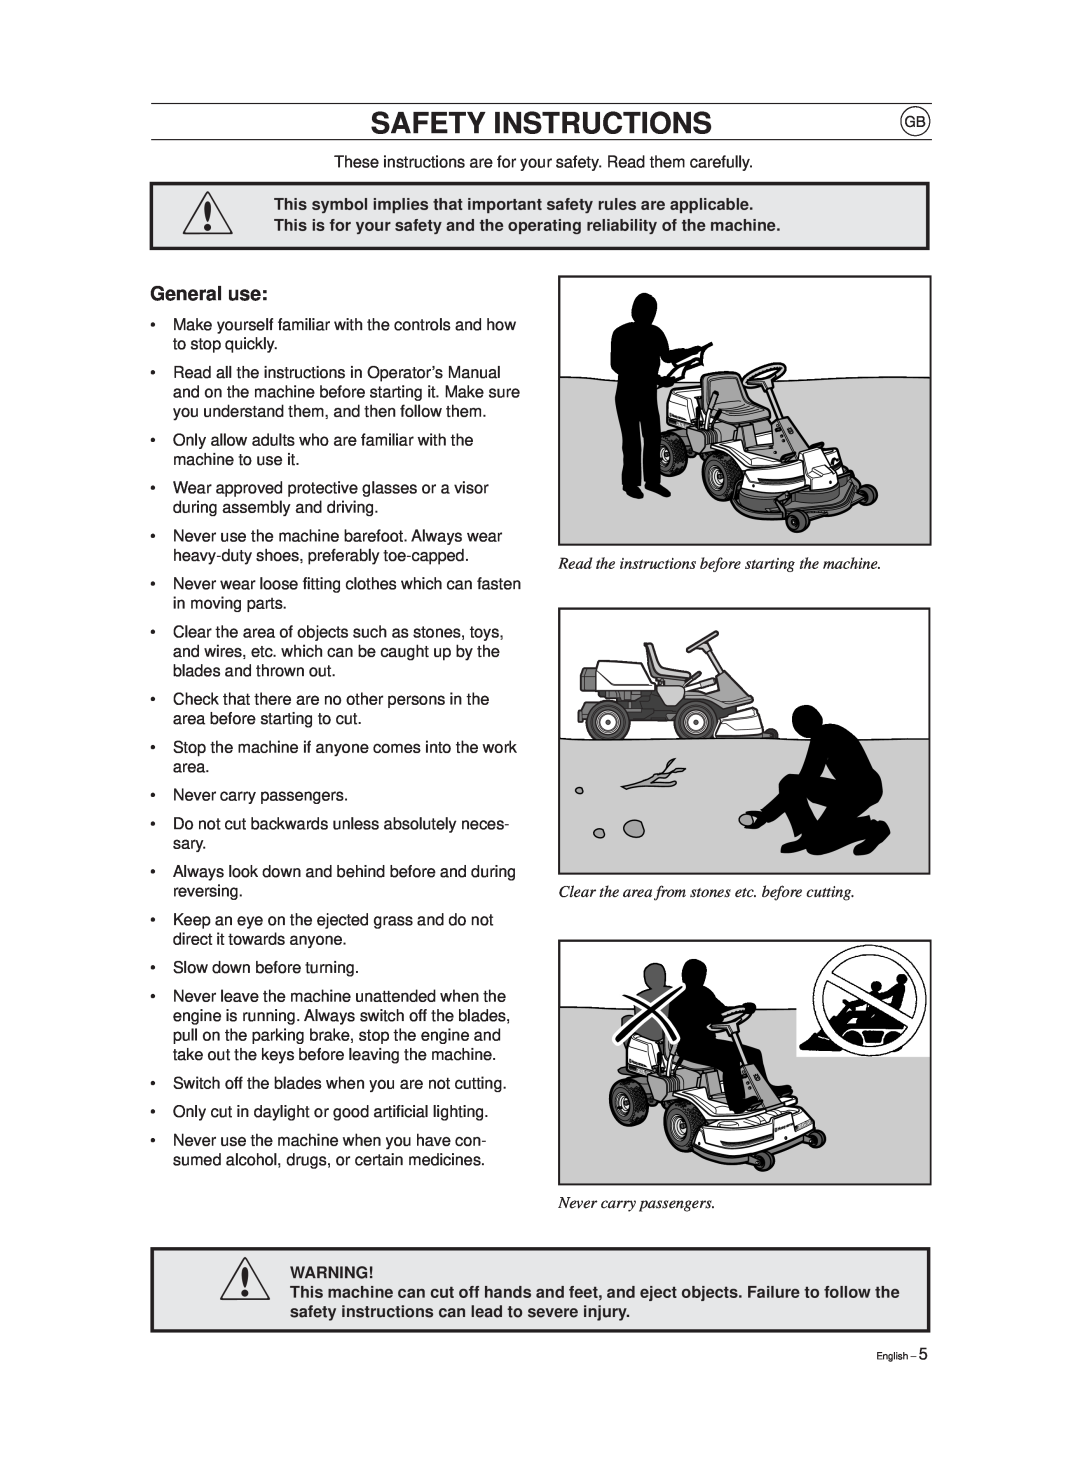 Husqvarna 970 General use, Read the instructions before starting the machine, Never carry passengers, Safety Instructions 